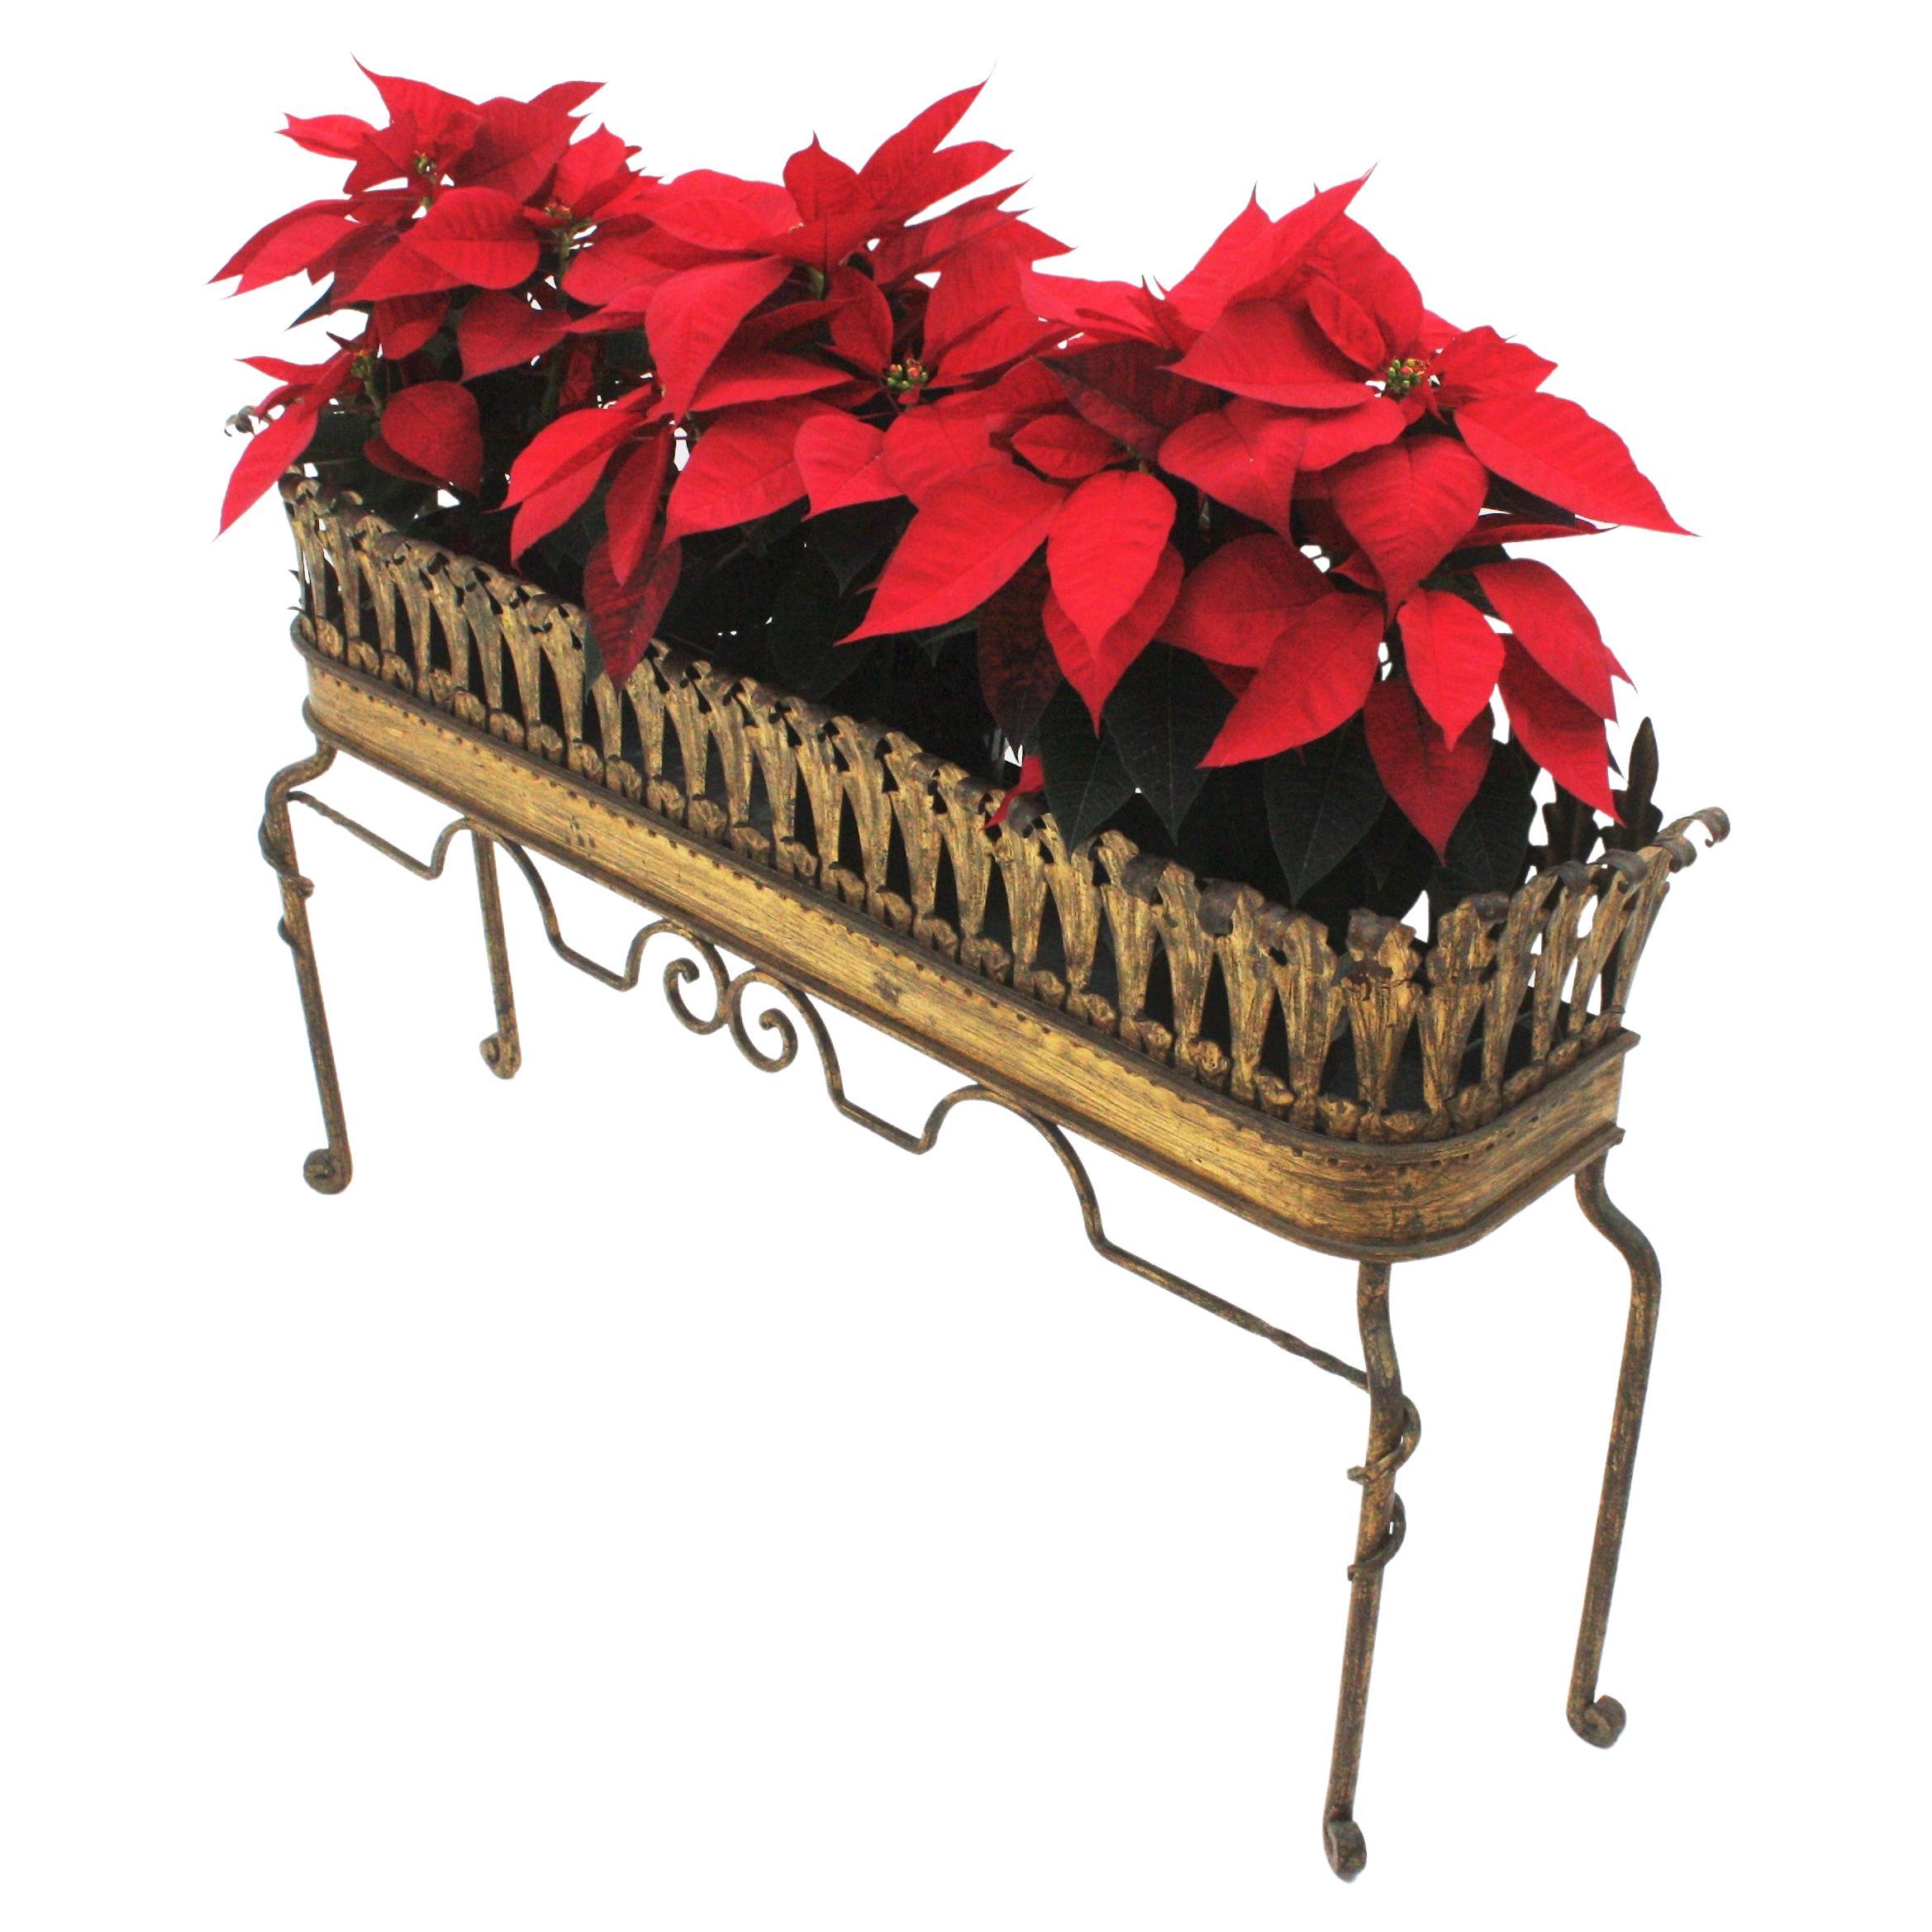 Large Hollywood Regency rectangular tall jardinière, Gold leaf, gilt iron, France, 1940s.
This elegant tall plant stand is entirely made by hand. Features a leafed rectangular shaped planter comprised by iron leaves. It stands up on four scroll